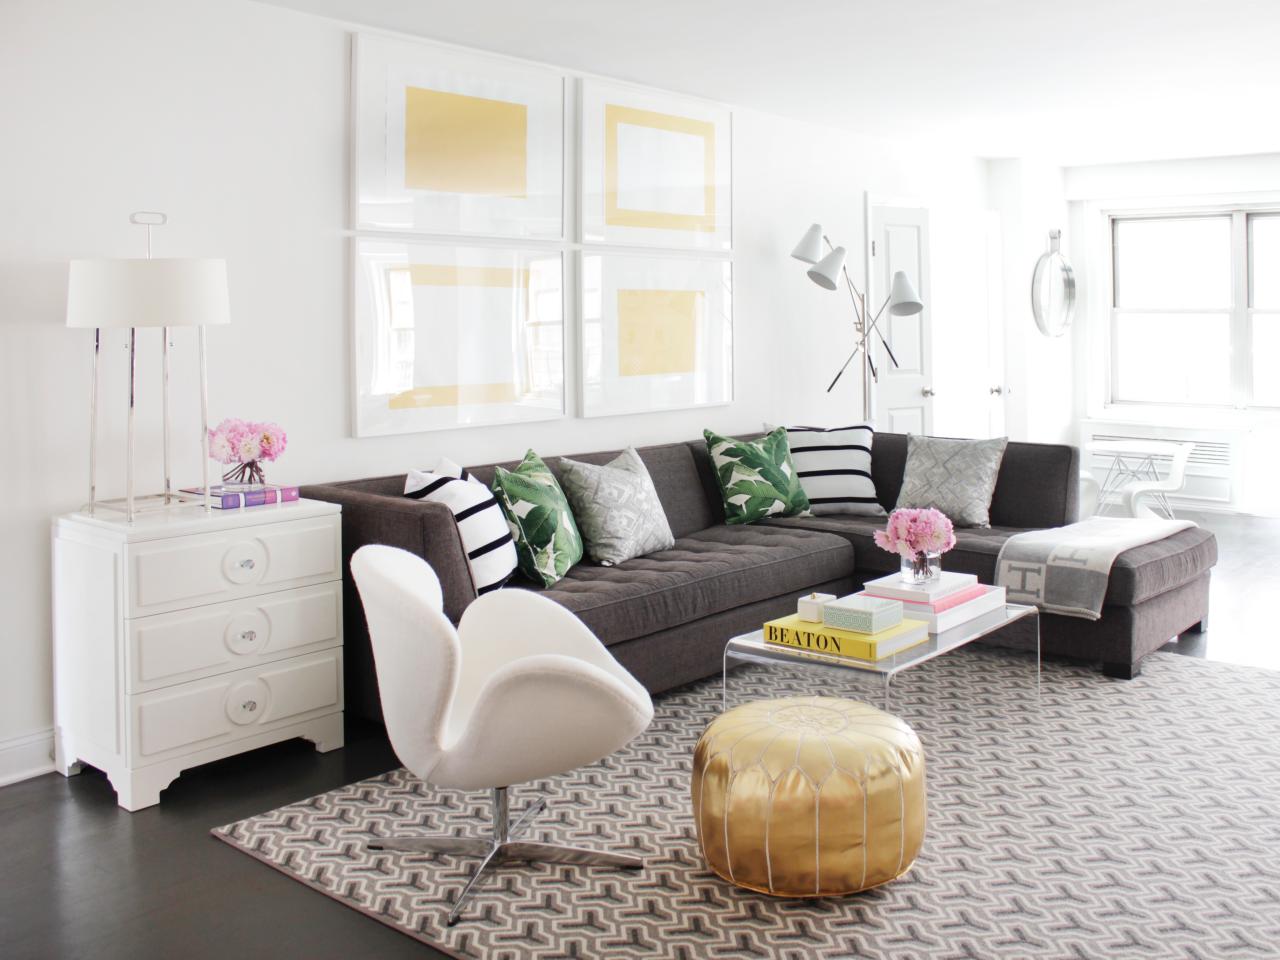 12 Living Room Ideas for a Grey Sectional | HGTV's Decorating & Design